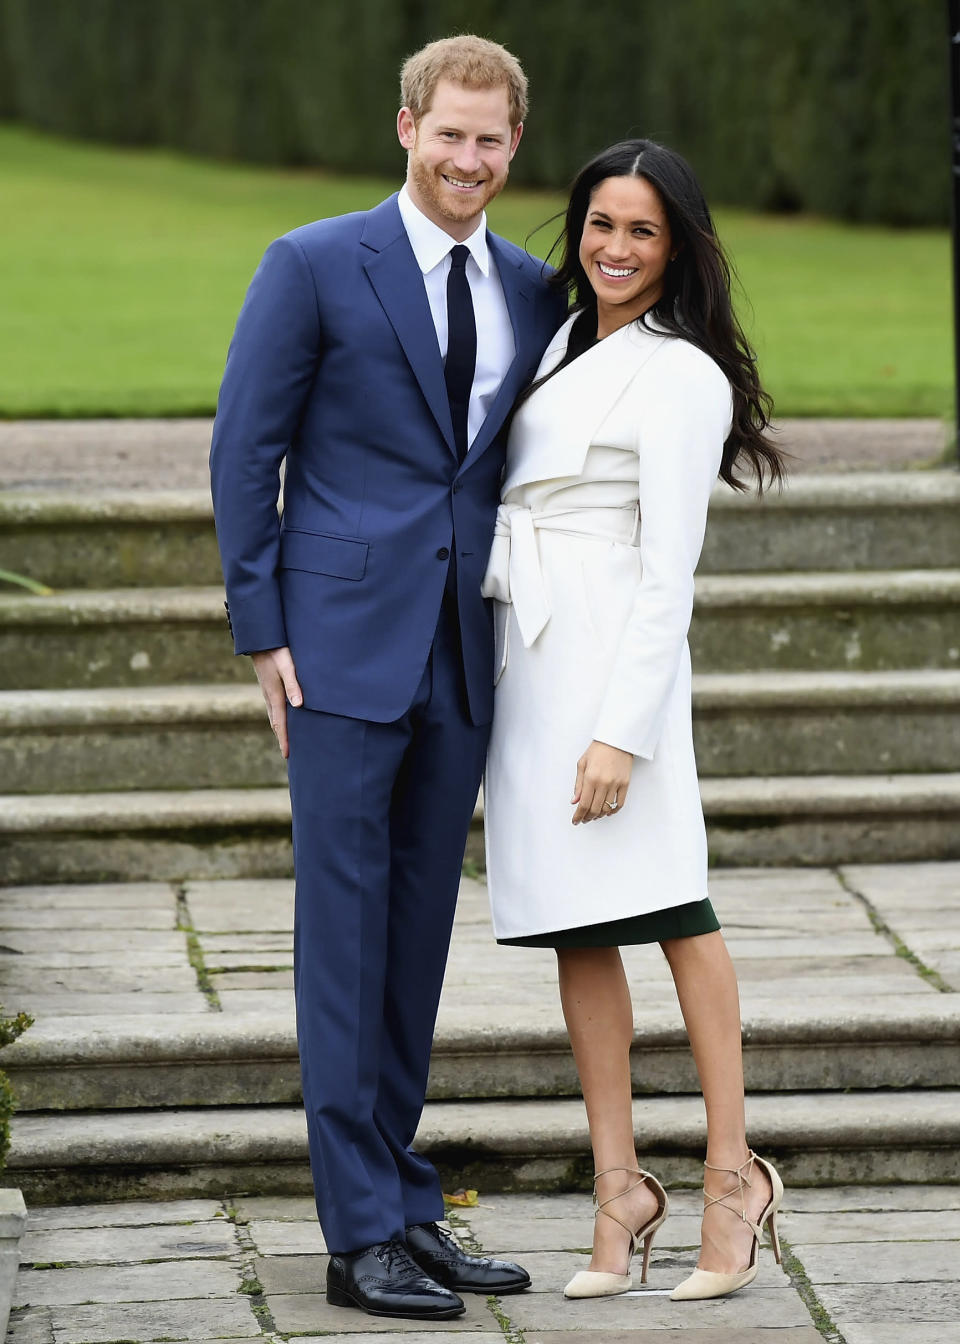 <p>On Nov. 27, it was announced that <a rel="nofollow" href="https://www.yahoo.com/lifestyle/tagged/Prince-Harry/" data-ylk="slk:Prince Harry" class="link rapid-noclick-resp">Prince Harry</a> and <a rel="nofollow" href="https://www.yahoo.com/lifestyle/tagged/Meghan-Markle/" data-ylk="slk:Meghan Markle" class="link rapid-noclick-resp">Meghan Markle</a> are engaged. The royal was asked by reporters during the photo op whether the proposal was romantic. “Of course it was,” he <a rel="nofollow" href="https://www.yahoo.com/lifestyle/britains-prince-harry-says-thrilled-engagement-u-actress-141429669.html" data-ylk="slk:replied;outcm:mb_qualified_link;_E:mb_qualified_link;ct:story;" class="link rapid-noclick-resp yahoo-link">replied</a>. (Photo: Getty Images) </p>